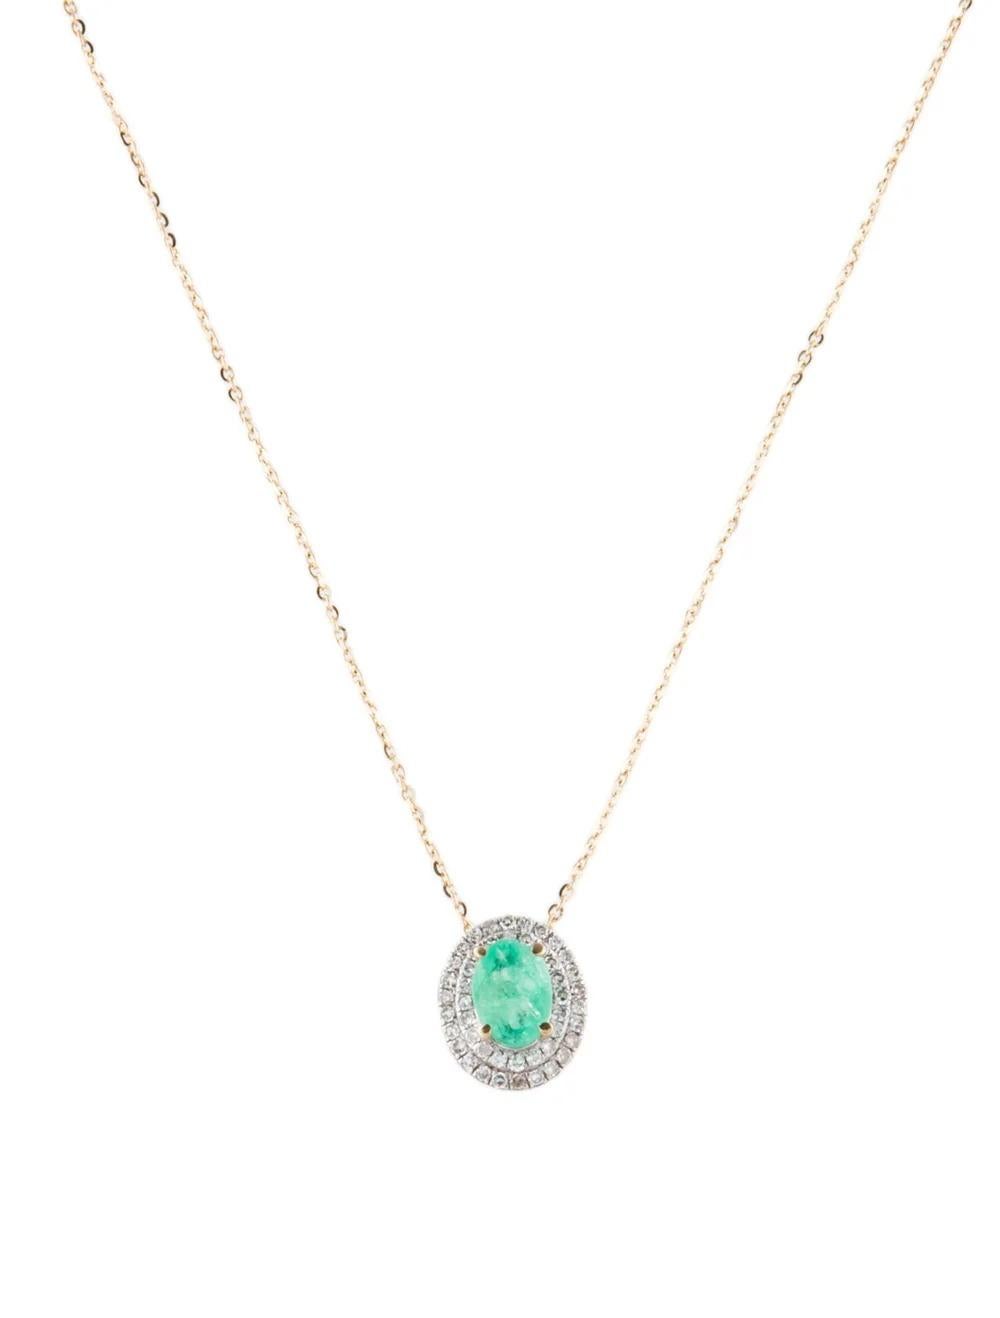 Immerse yourself in the timeless elegance of our 14K Yellow Gold Emerald & Diamond Pendant Necklace. This exquisite piece features a captivating Oval Modified Brilliant Emerald, complemented by shimmering diamonds.

Specifications:

* Length: 16